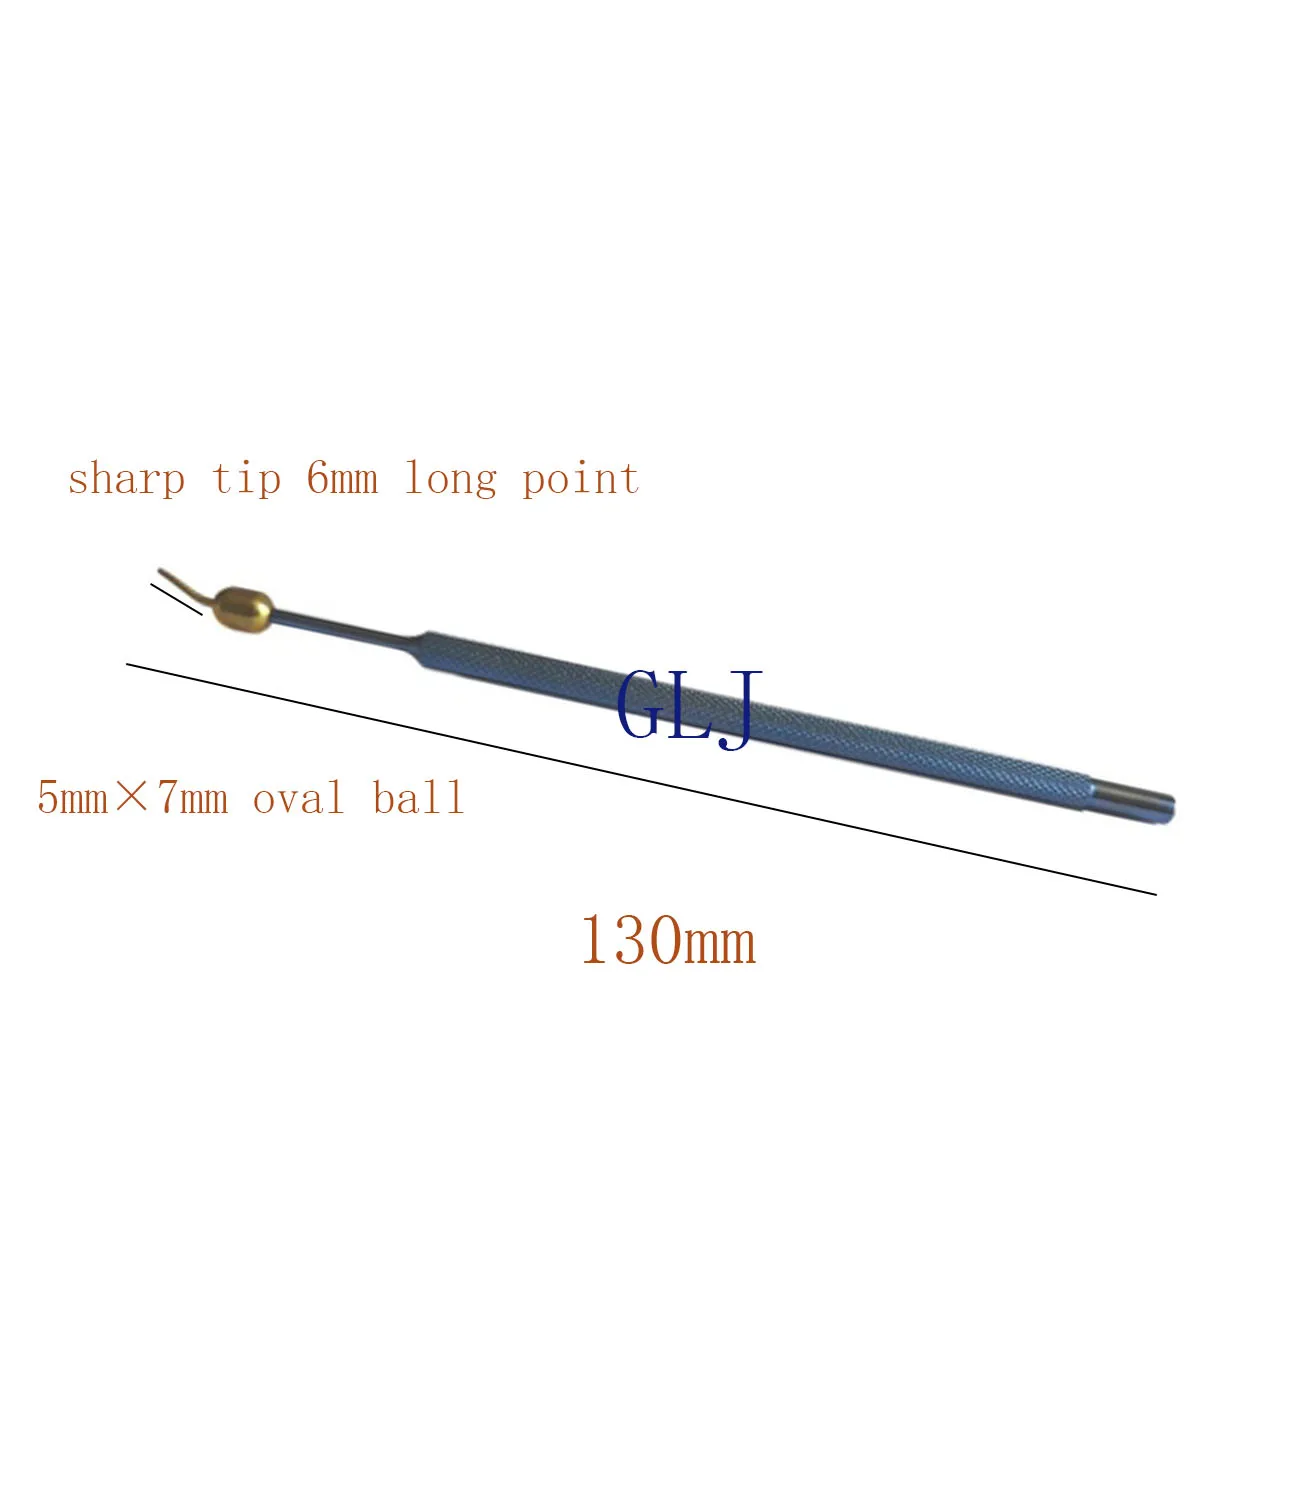 

Microscopic Equipment Integrated Spherical Cautery Ophthalmic Hemostatic Device 5mm×7mm Oval Ball Sharp Tip